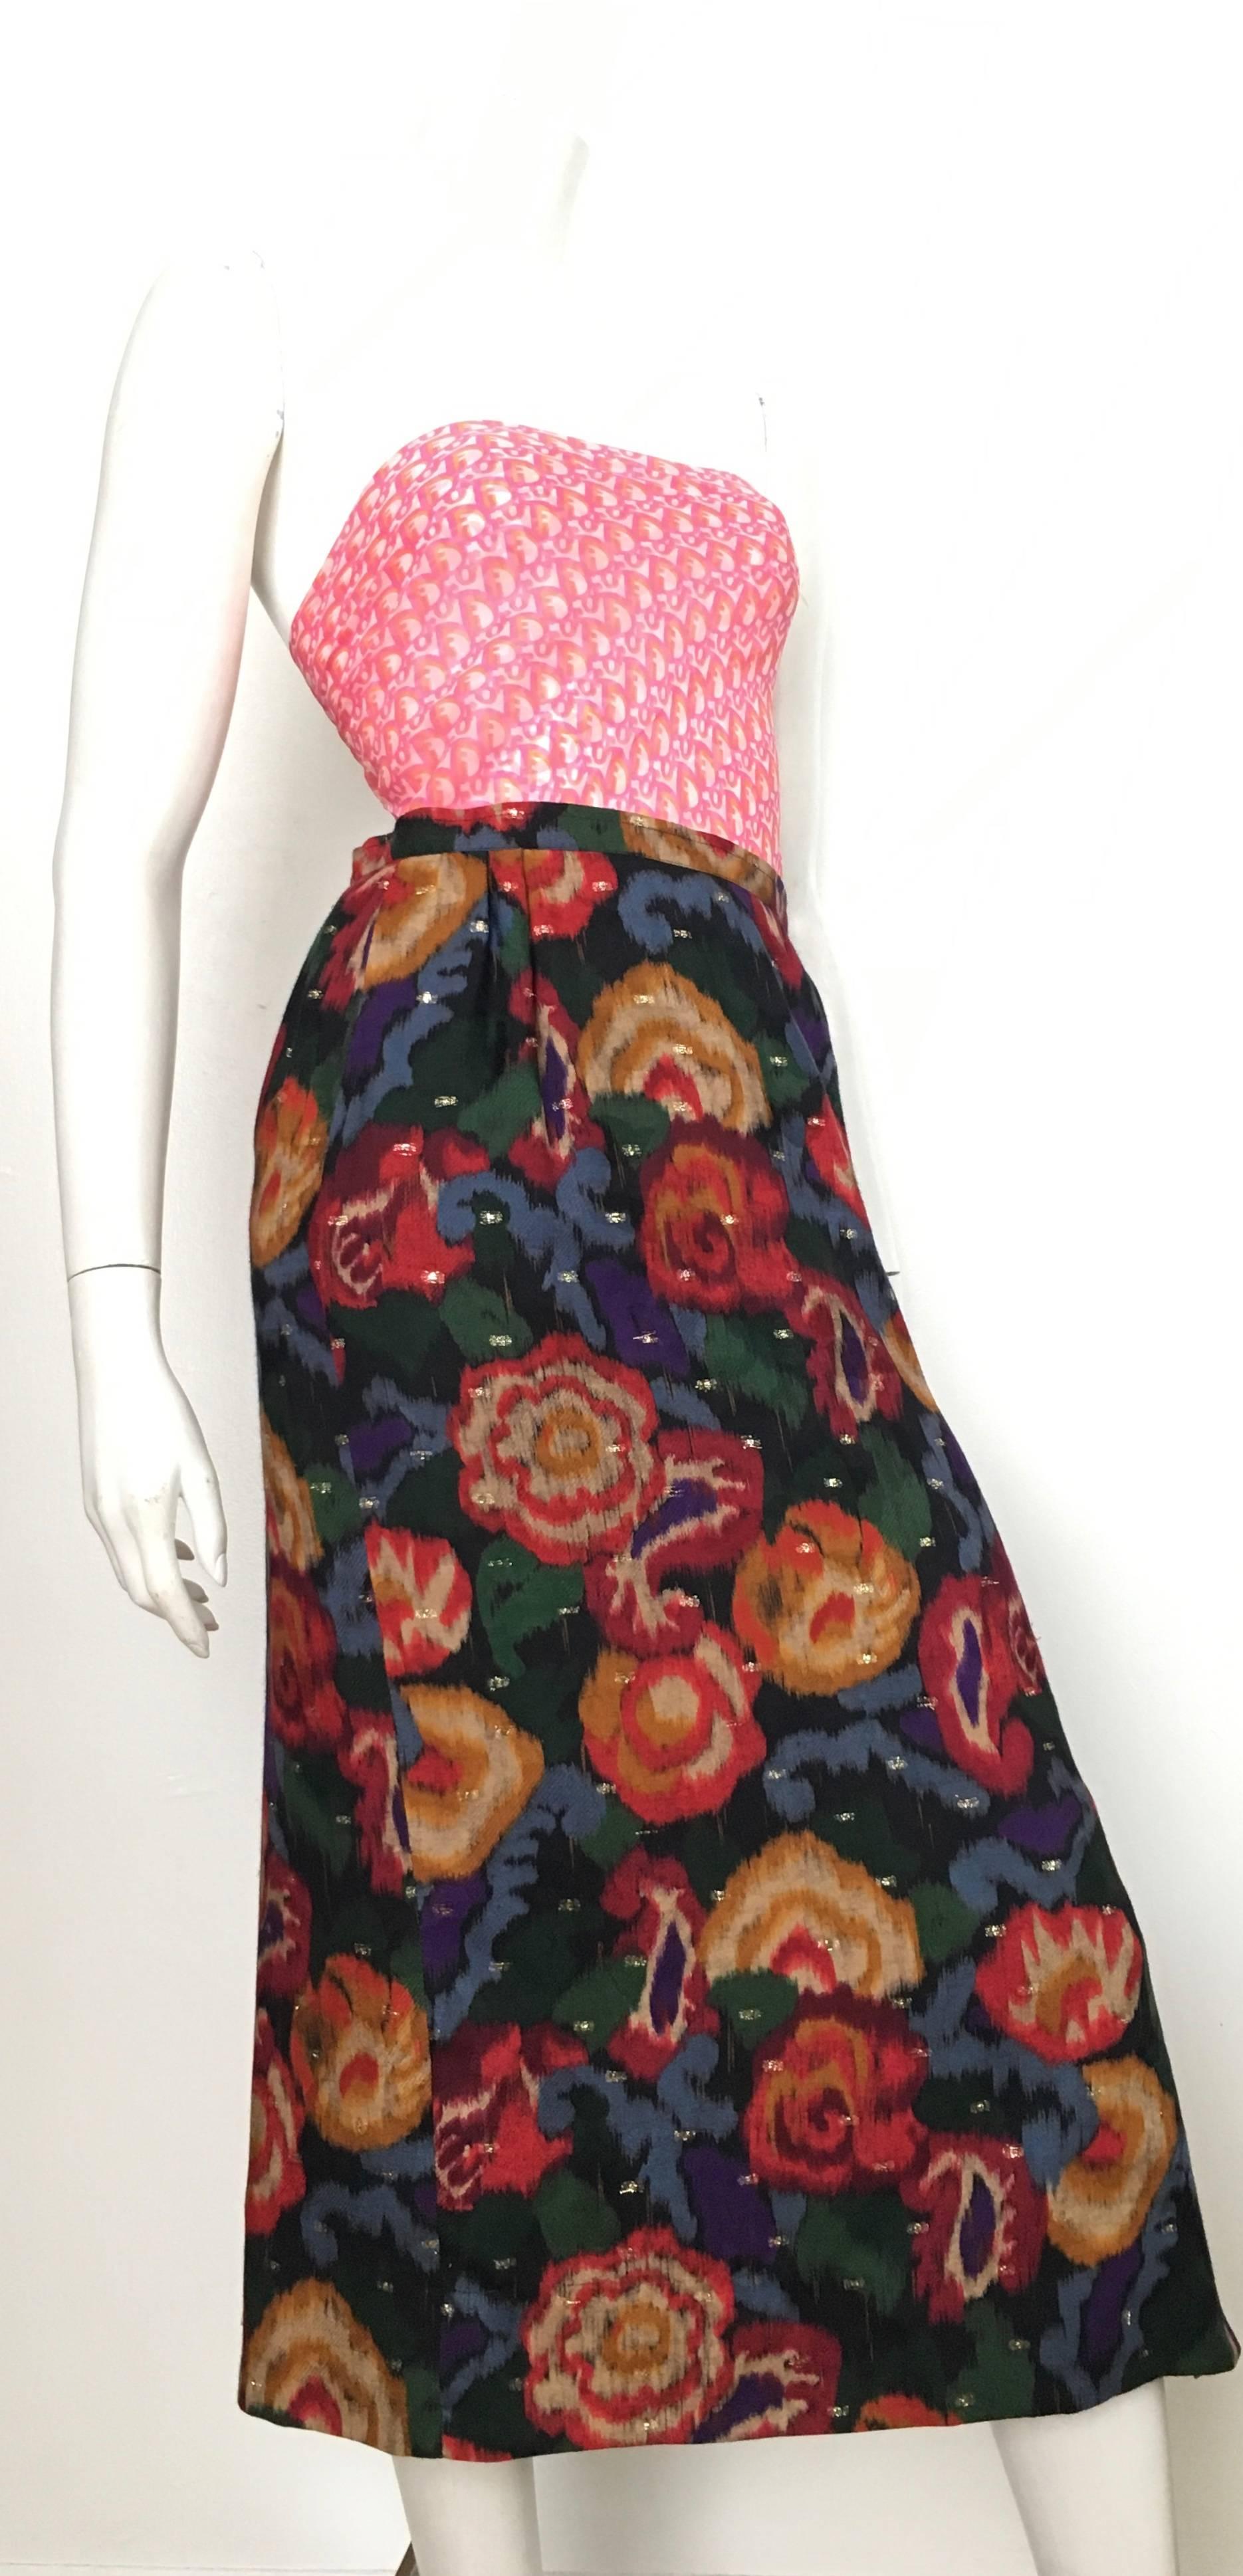 Emanuel Ungaro Parallele Paris 1980s wool / silk long floral skirt with gold metal fabric threads running throughout the pattern is labeled a size 8 but fits more like a USA size 4 / 6. The waist on this skirt is 27